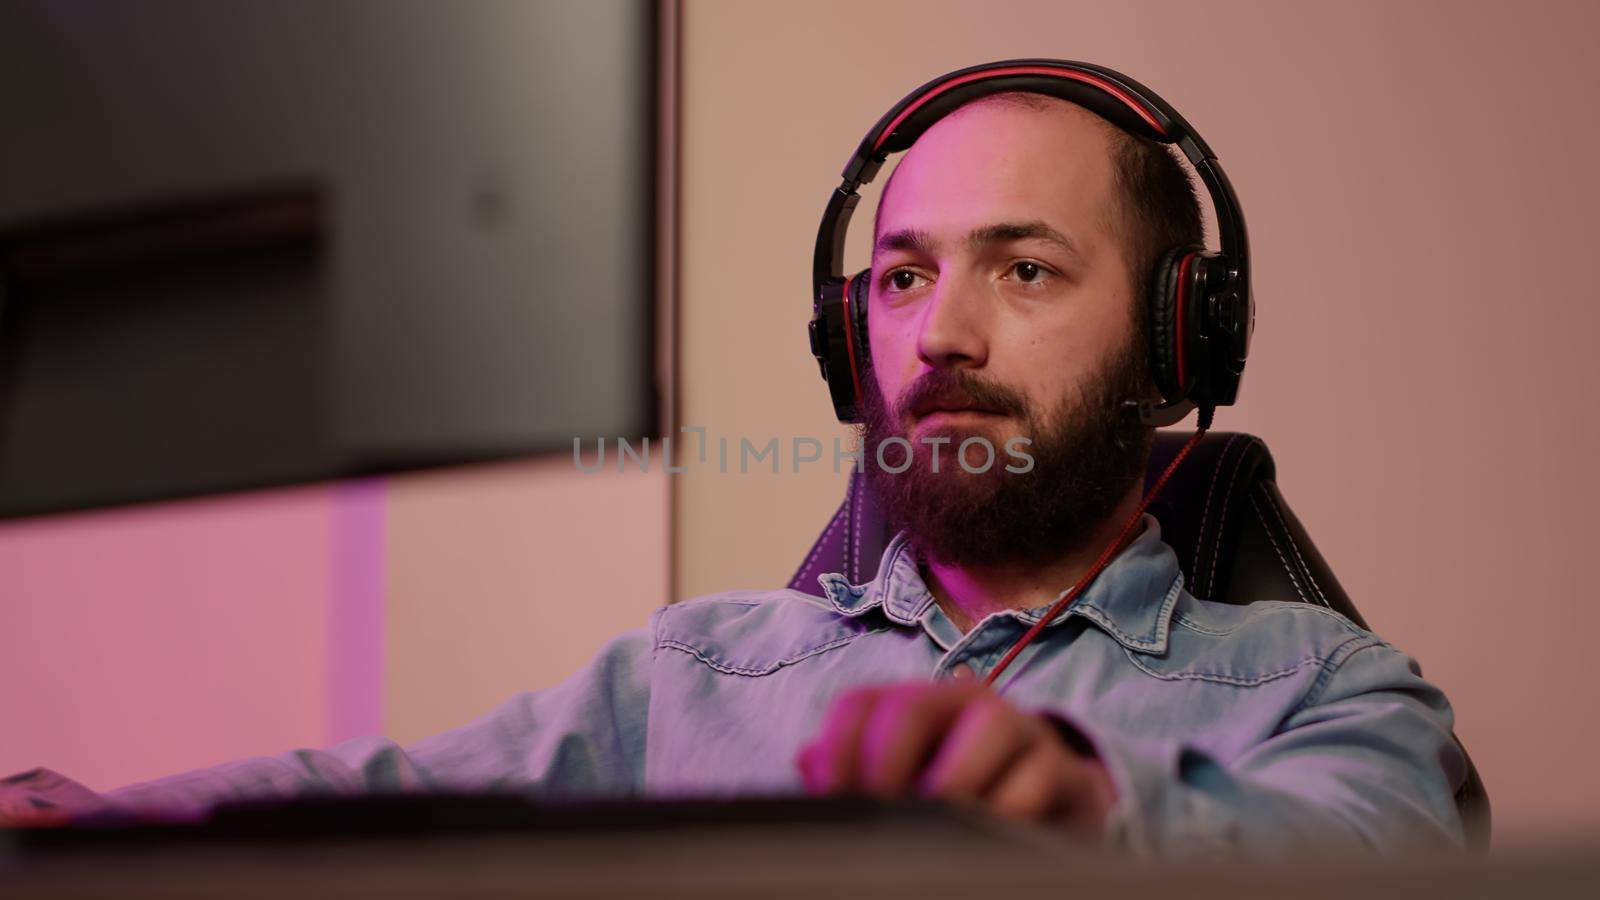 Handheld shot of man with gaming headset looking at computer screen and talking to team members while streaming gameplay. Gamer playing multiplayer online action game using professional pc setup.